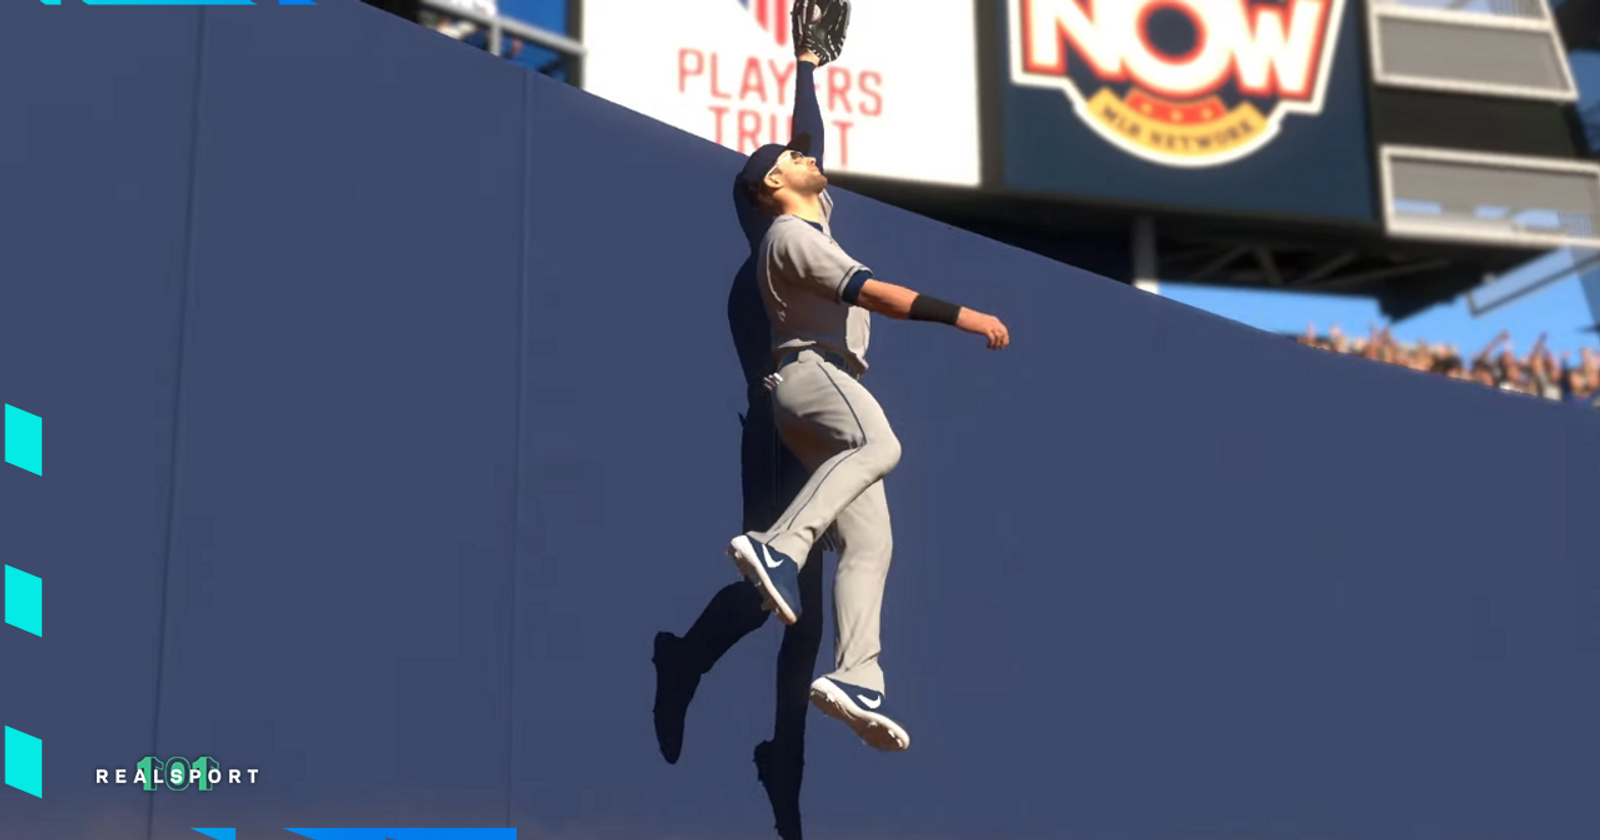 MLB The Show 21 launches Fall Circuit